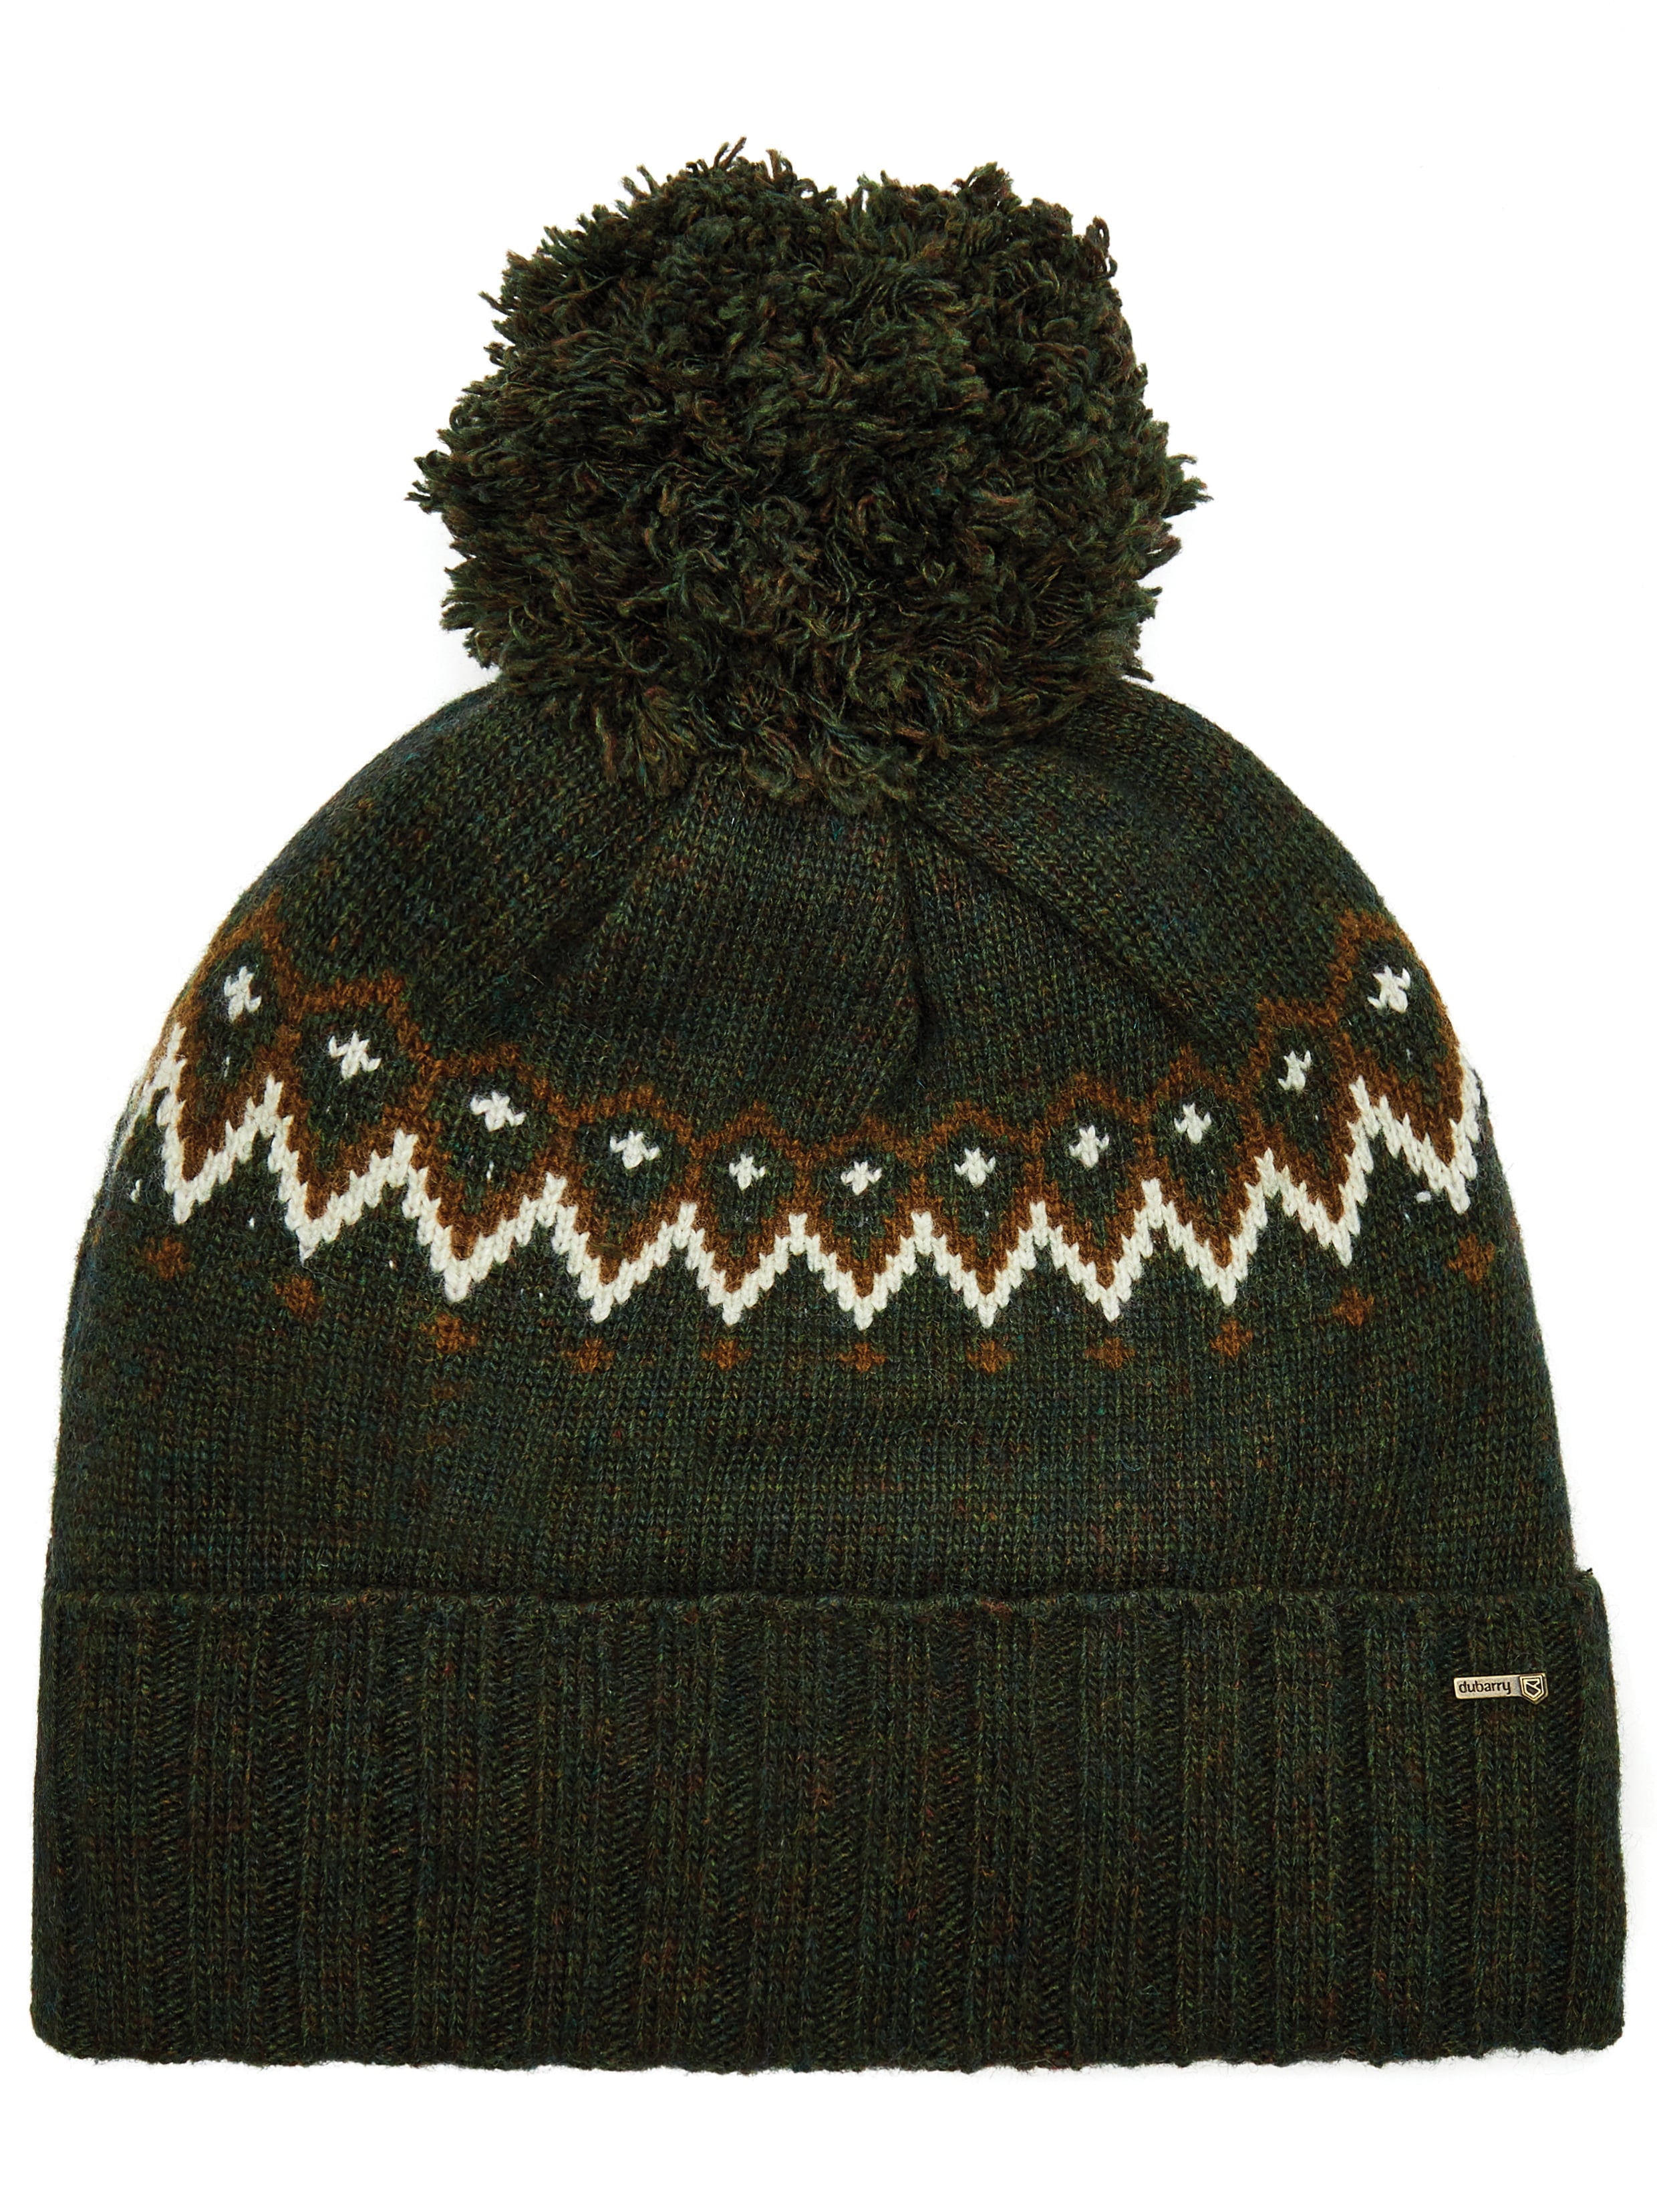 Conolly Beanie - Olive